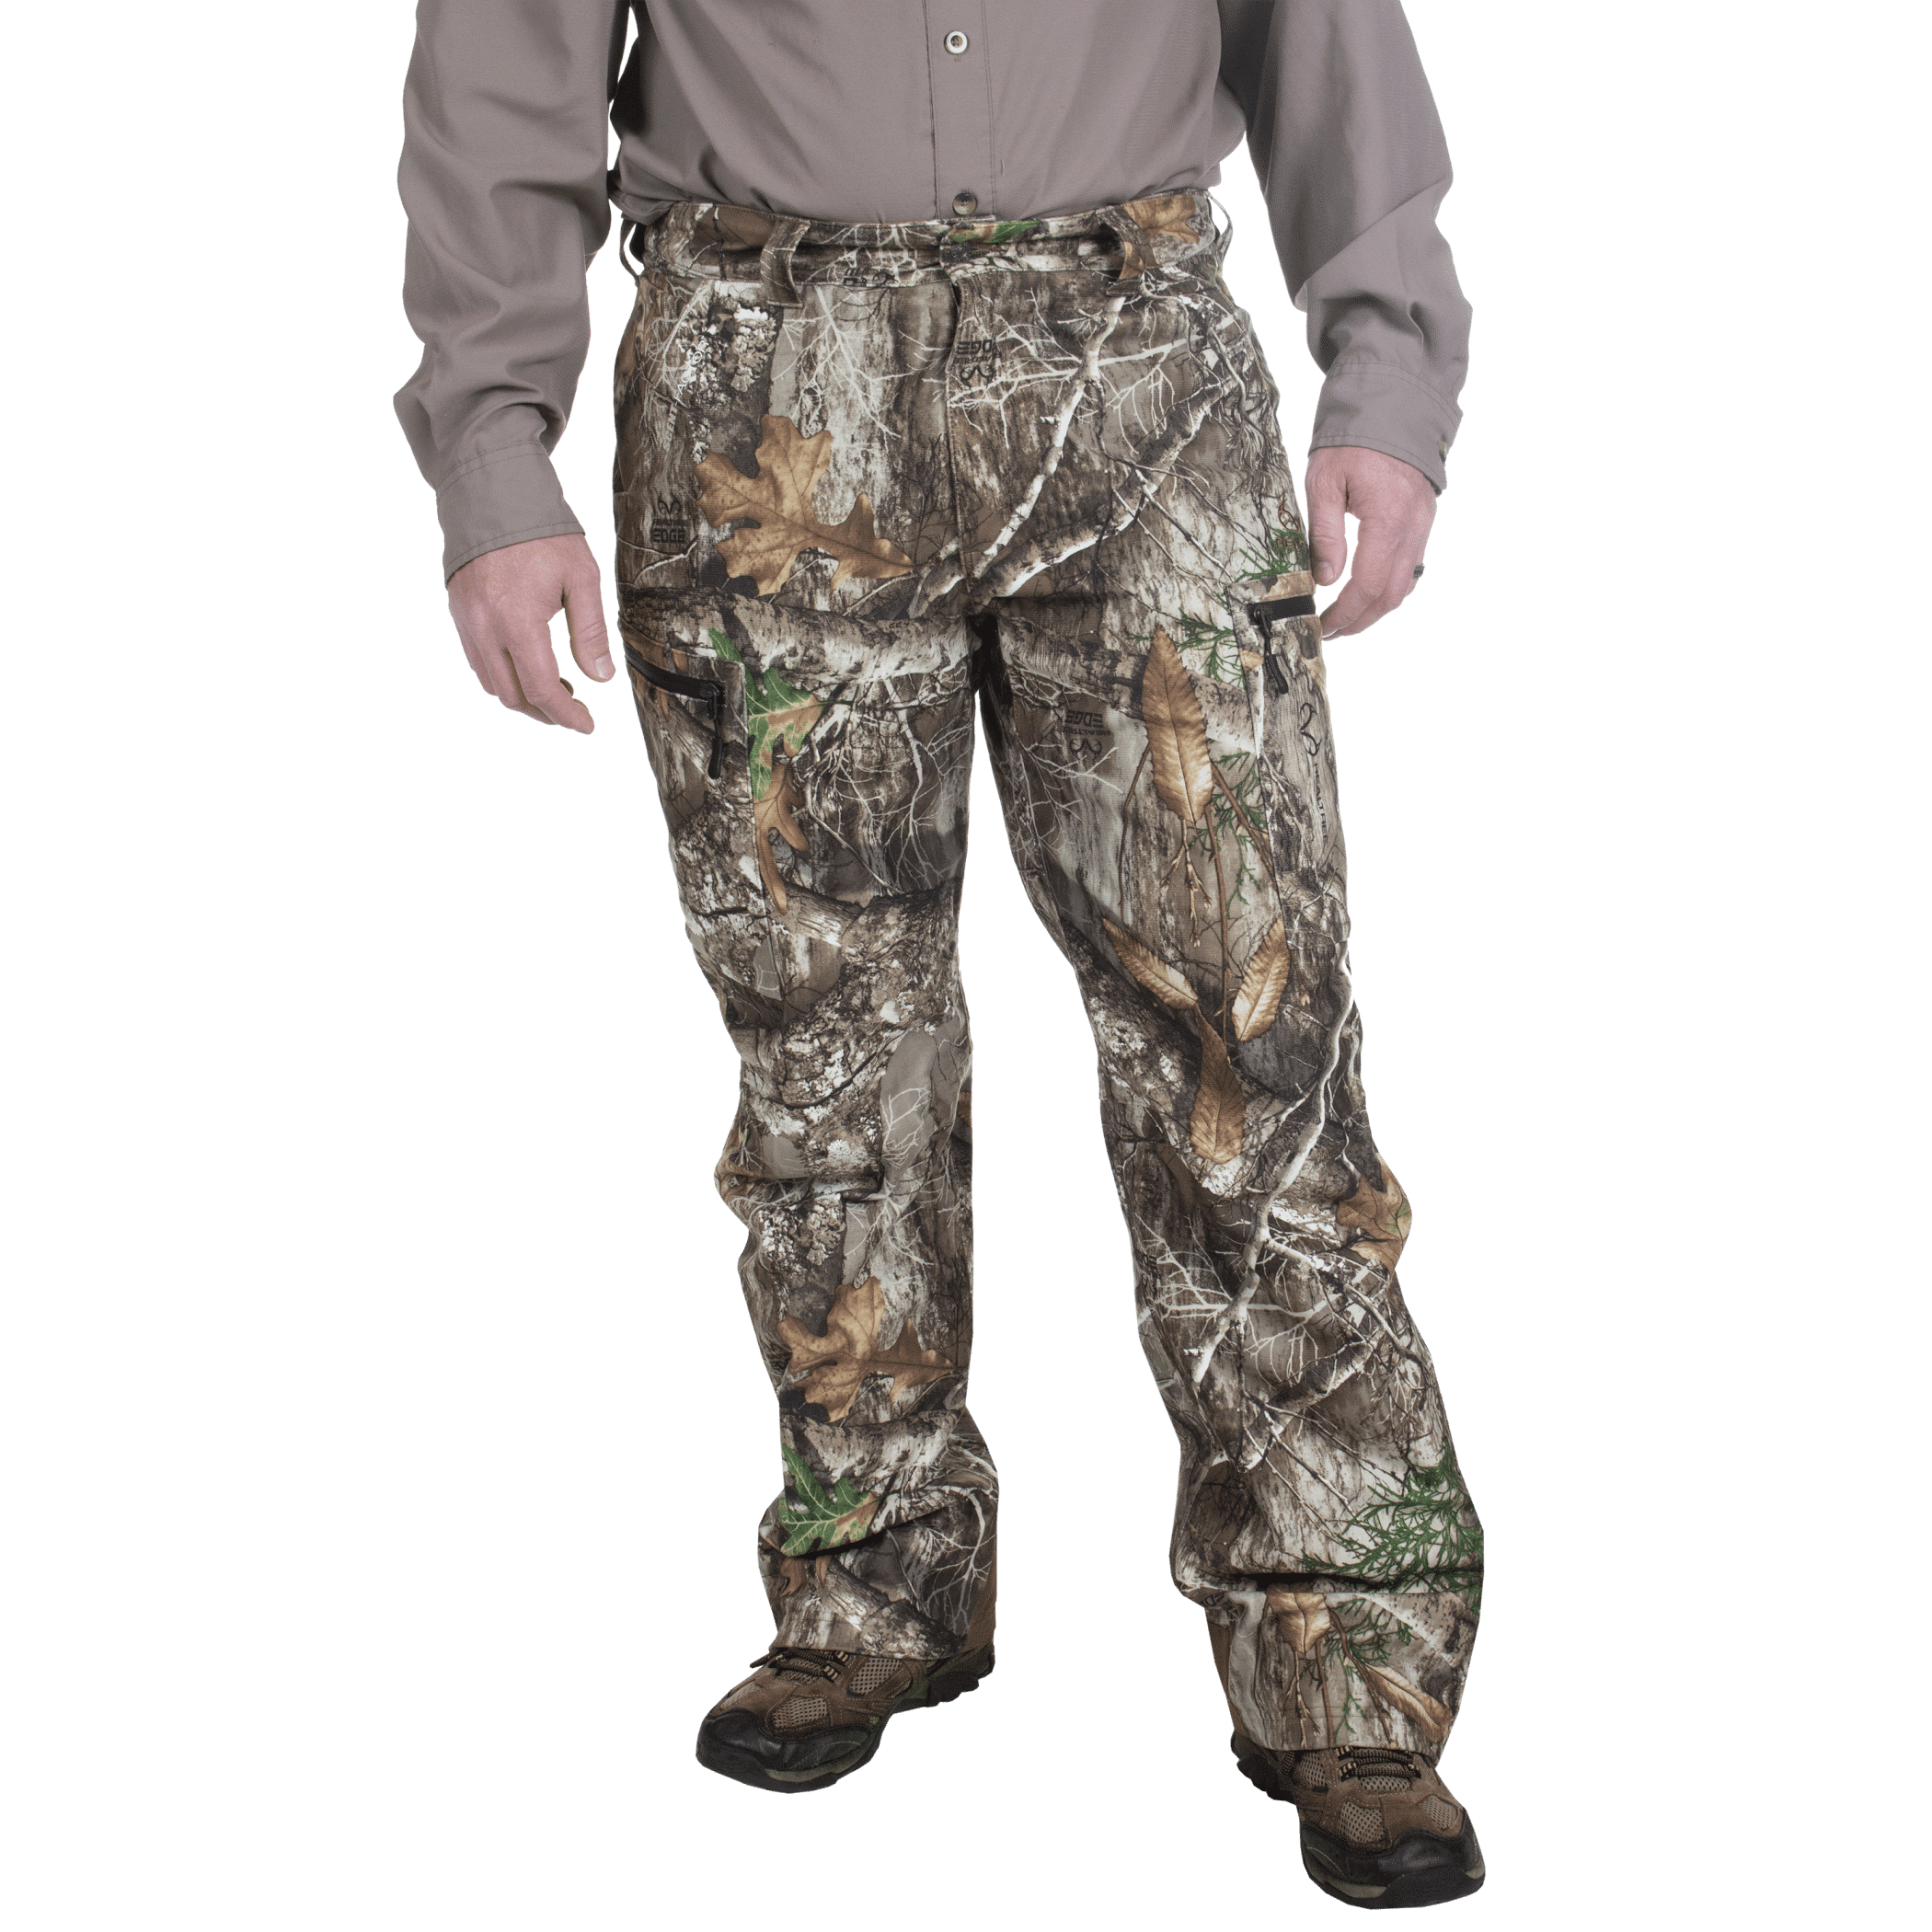 Hot Shot Mens Camo Performance Pant Realtree Edge Hunting Outdoor Apparel, XX-Large, Men's, Size: 2XL